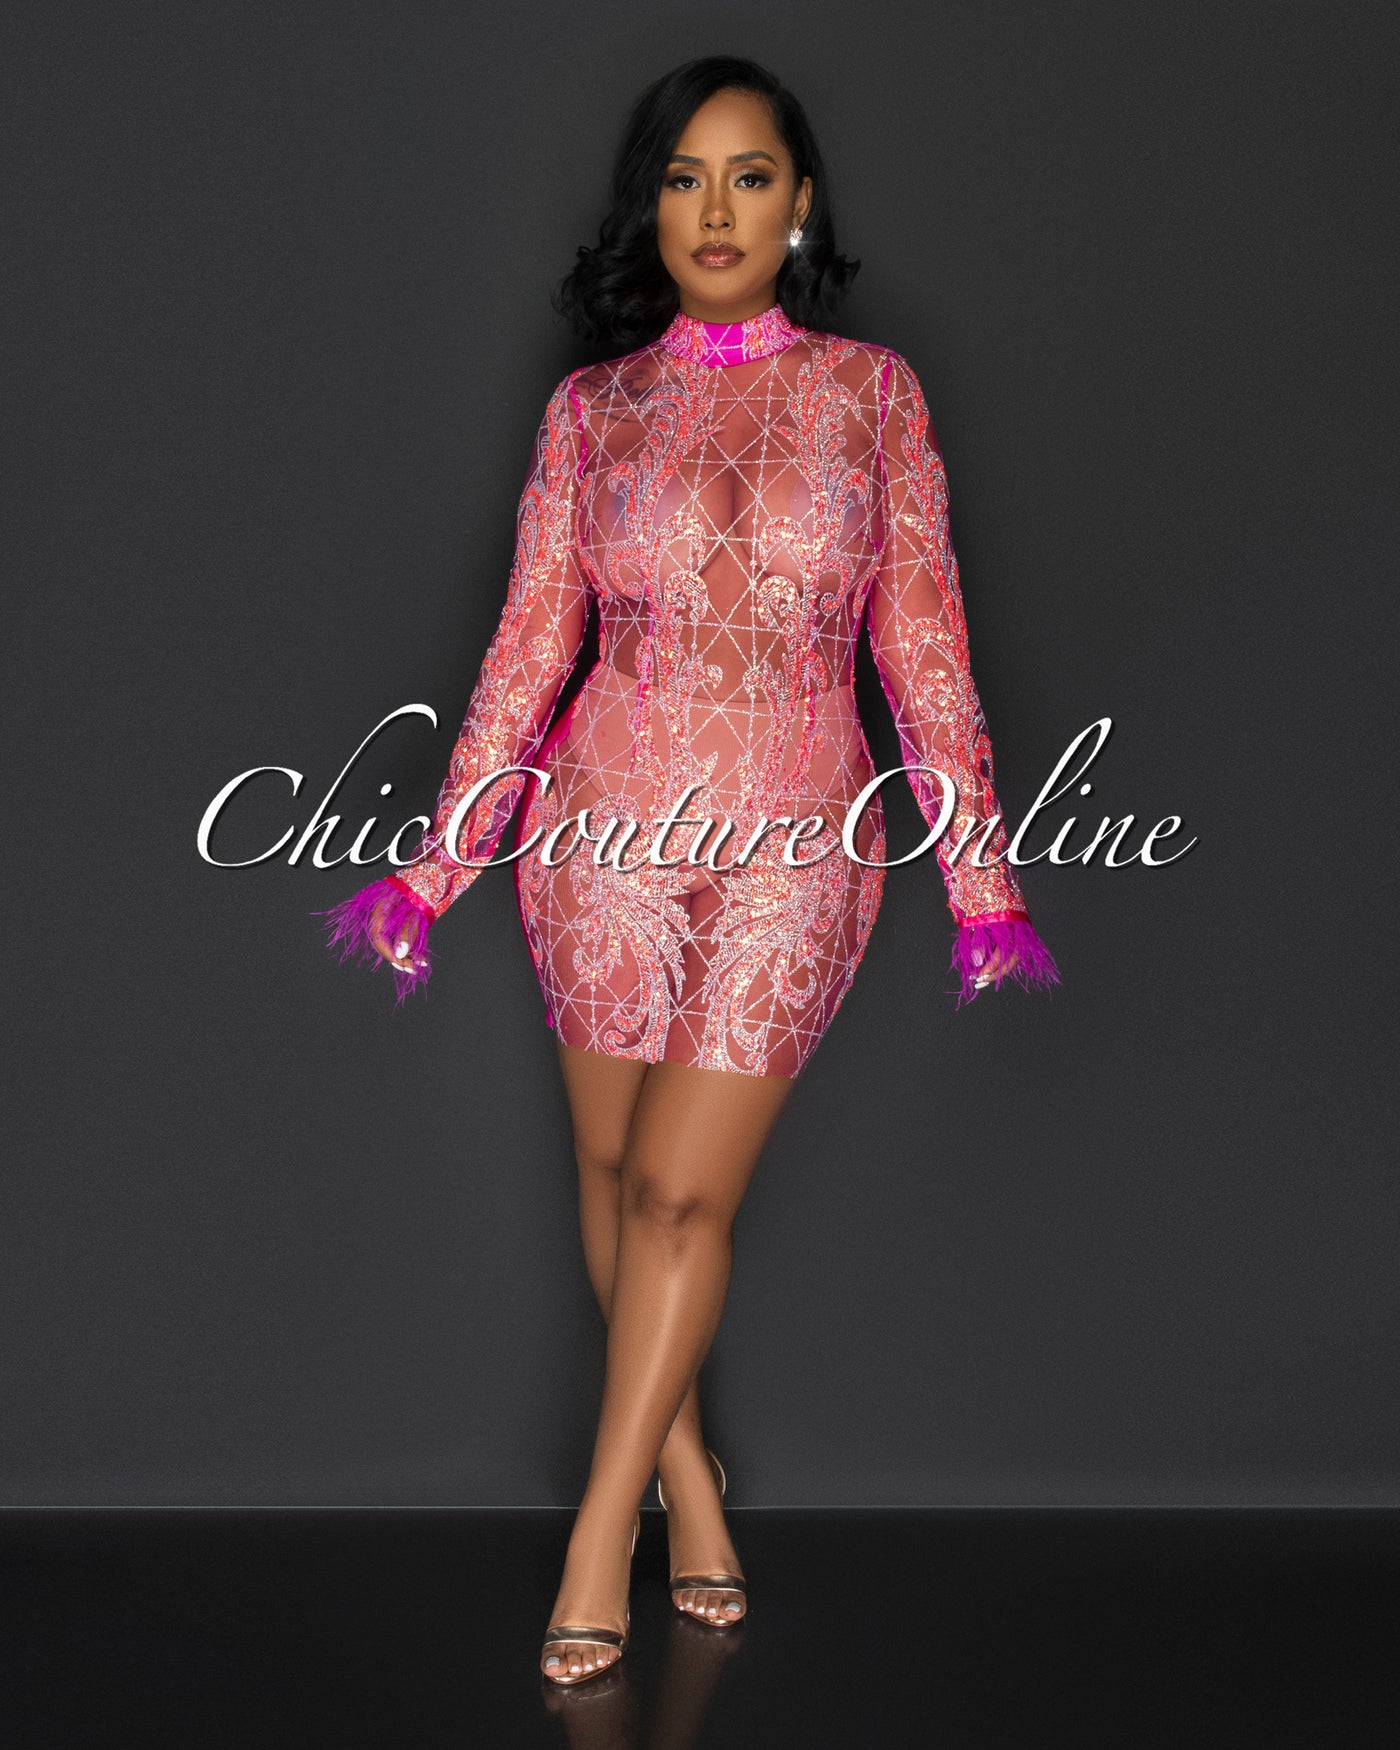 Dominique Neon Pink Sequins Sheer Feathers Dress